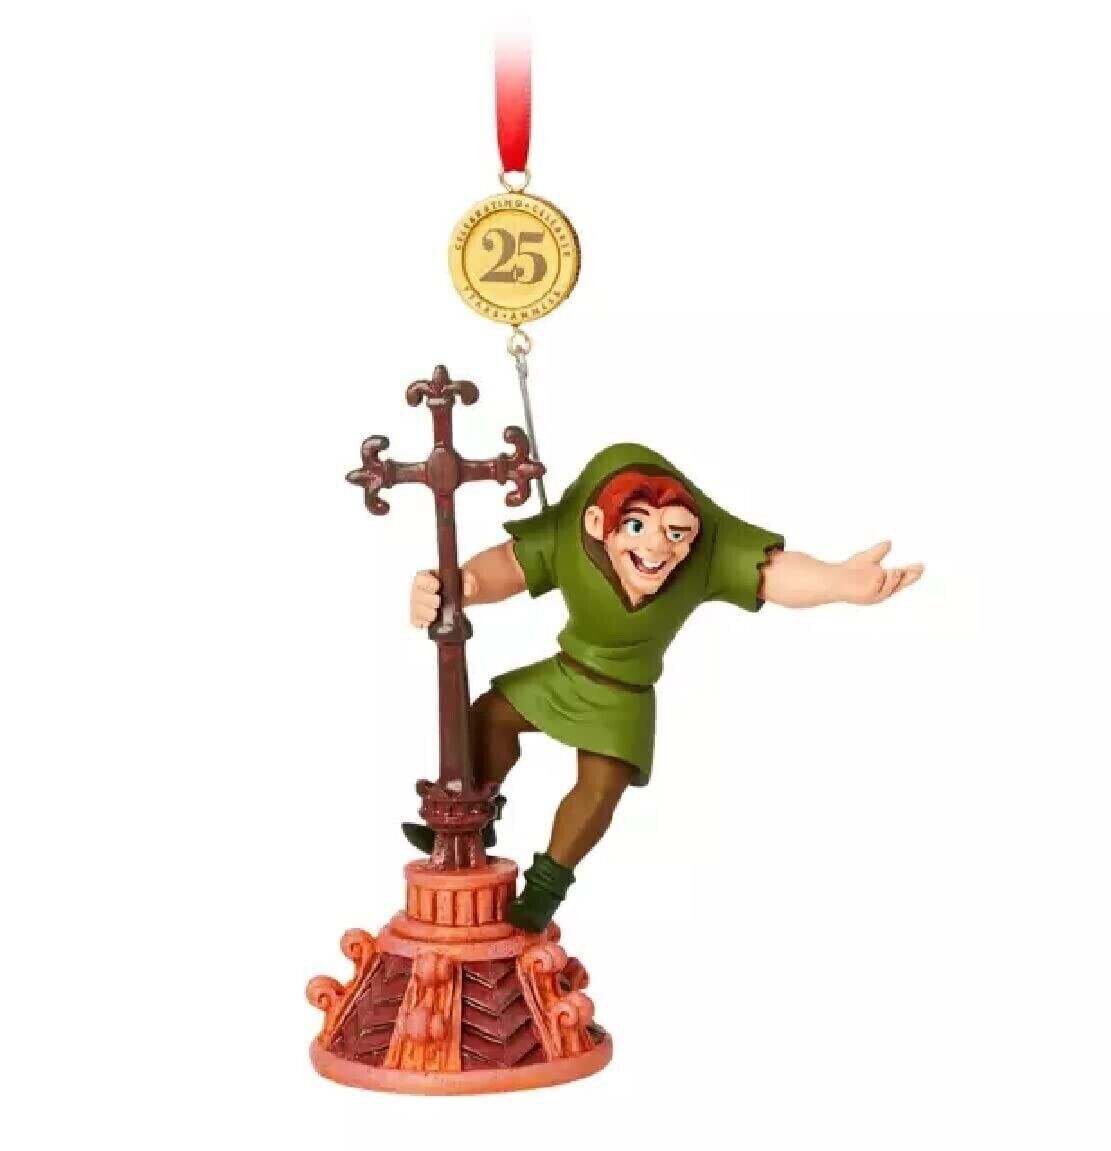 NEW 2021 Disney Store THE HUNCHBACK OF NOTRE DAME Legacy Sketchbook Ornament NWT